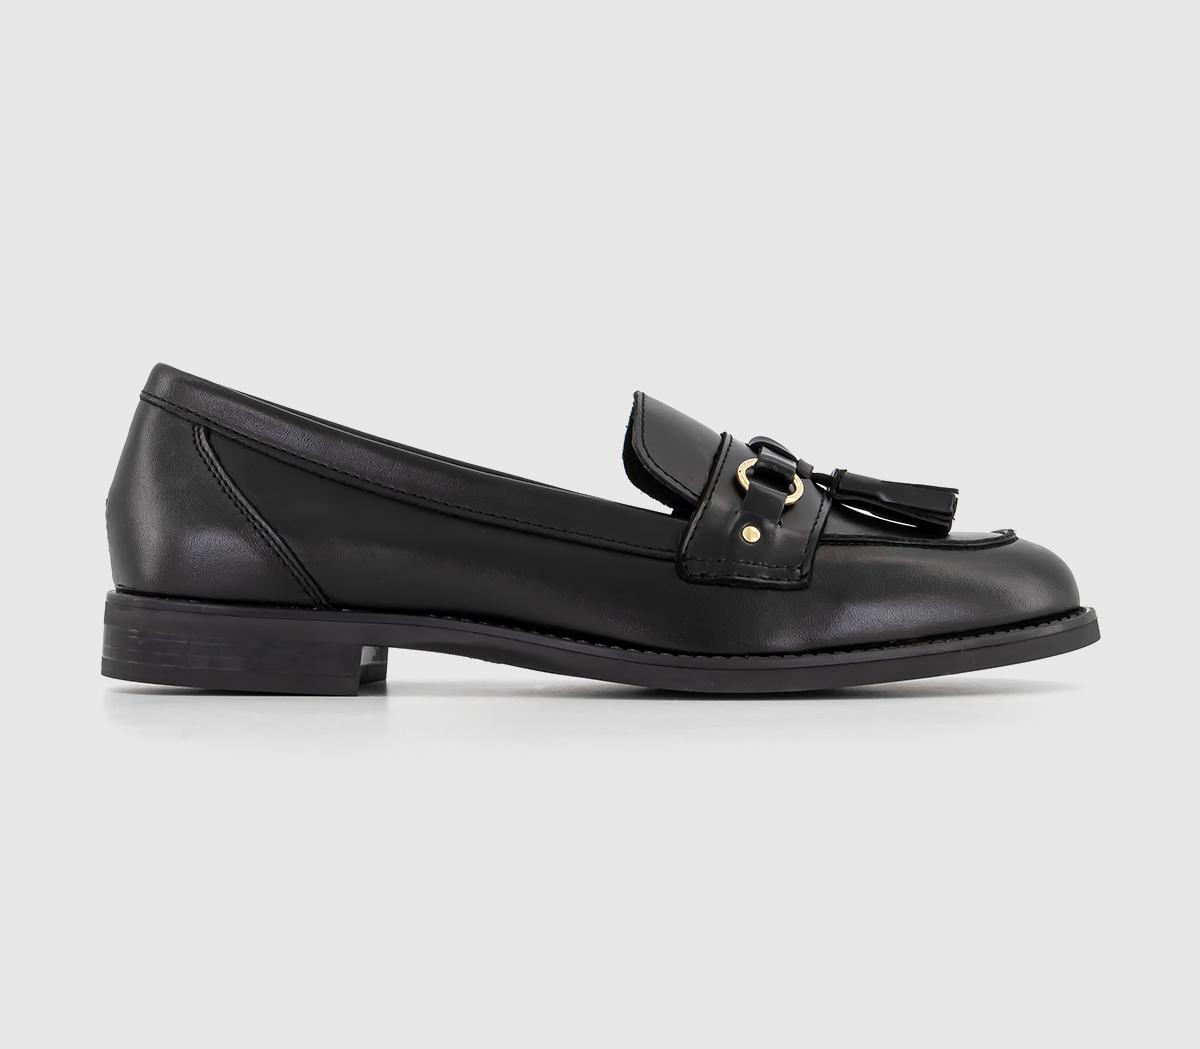 Founder Leather Trim Tassel Loafers Black Leather